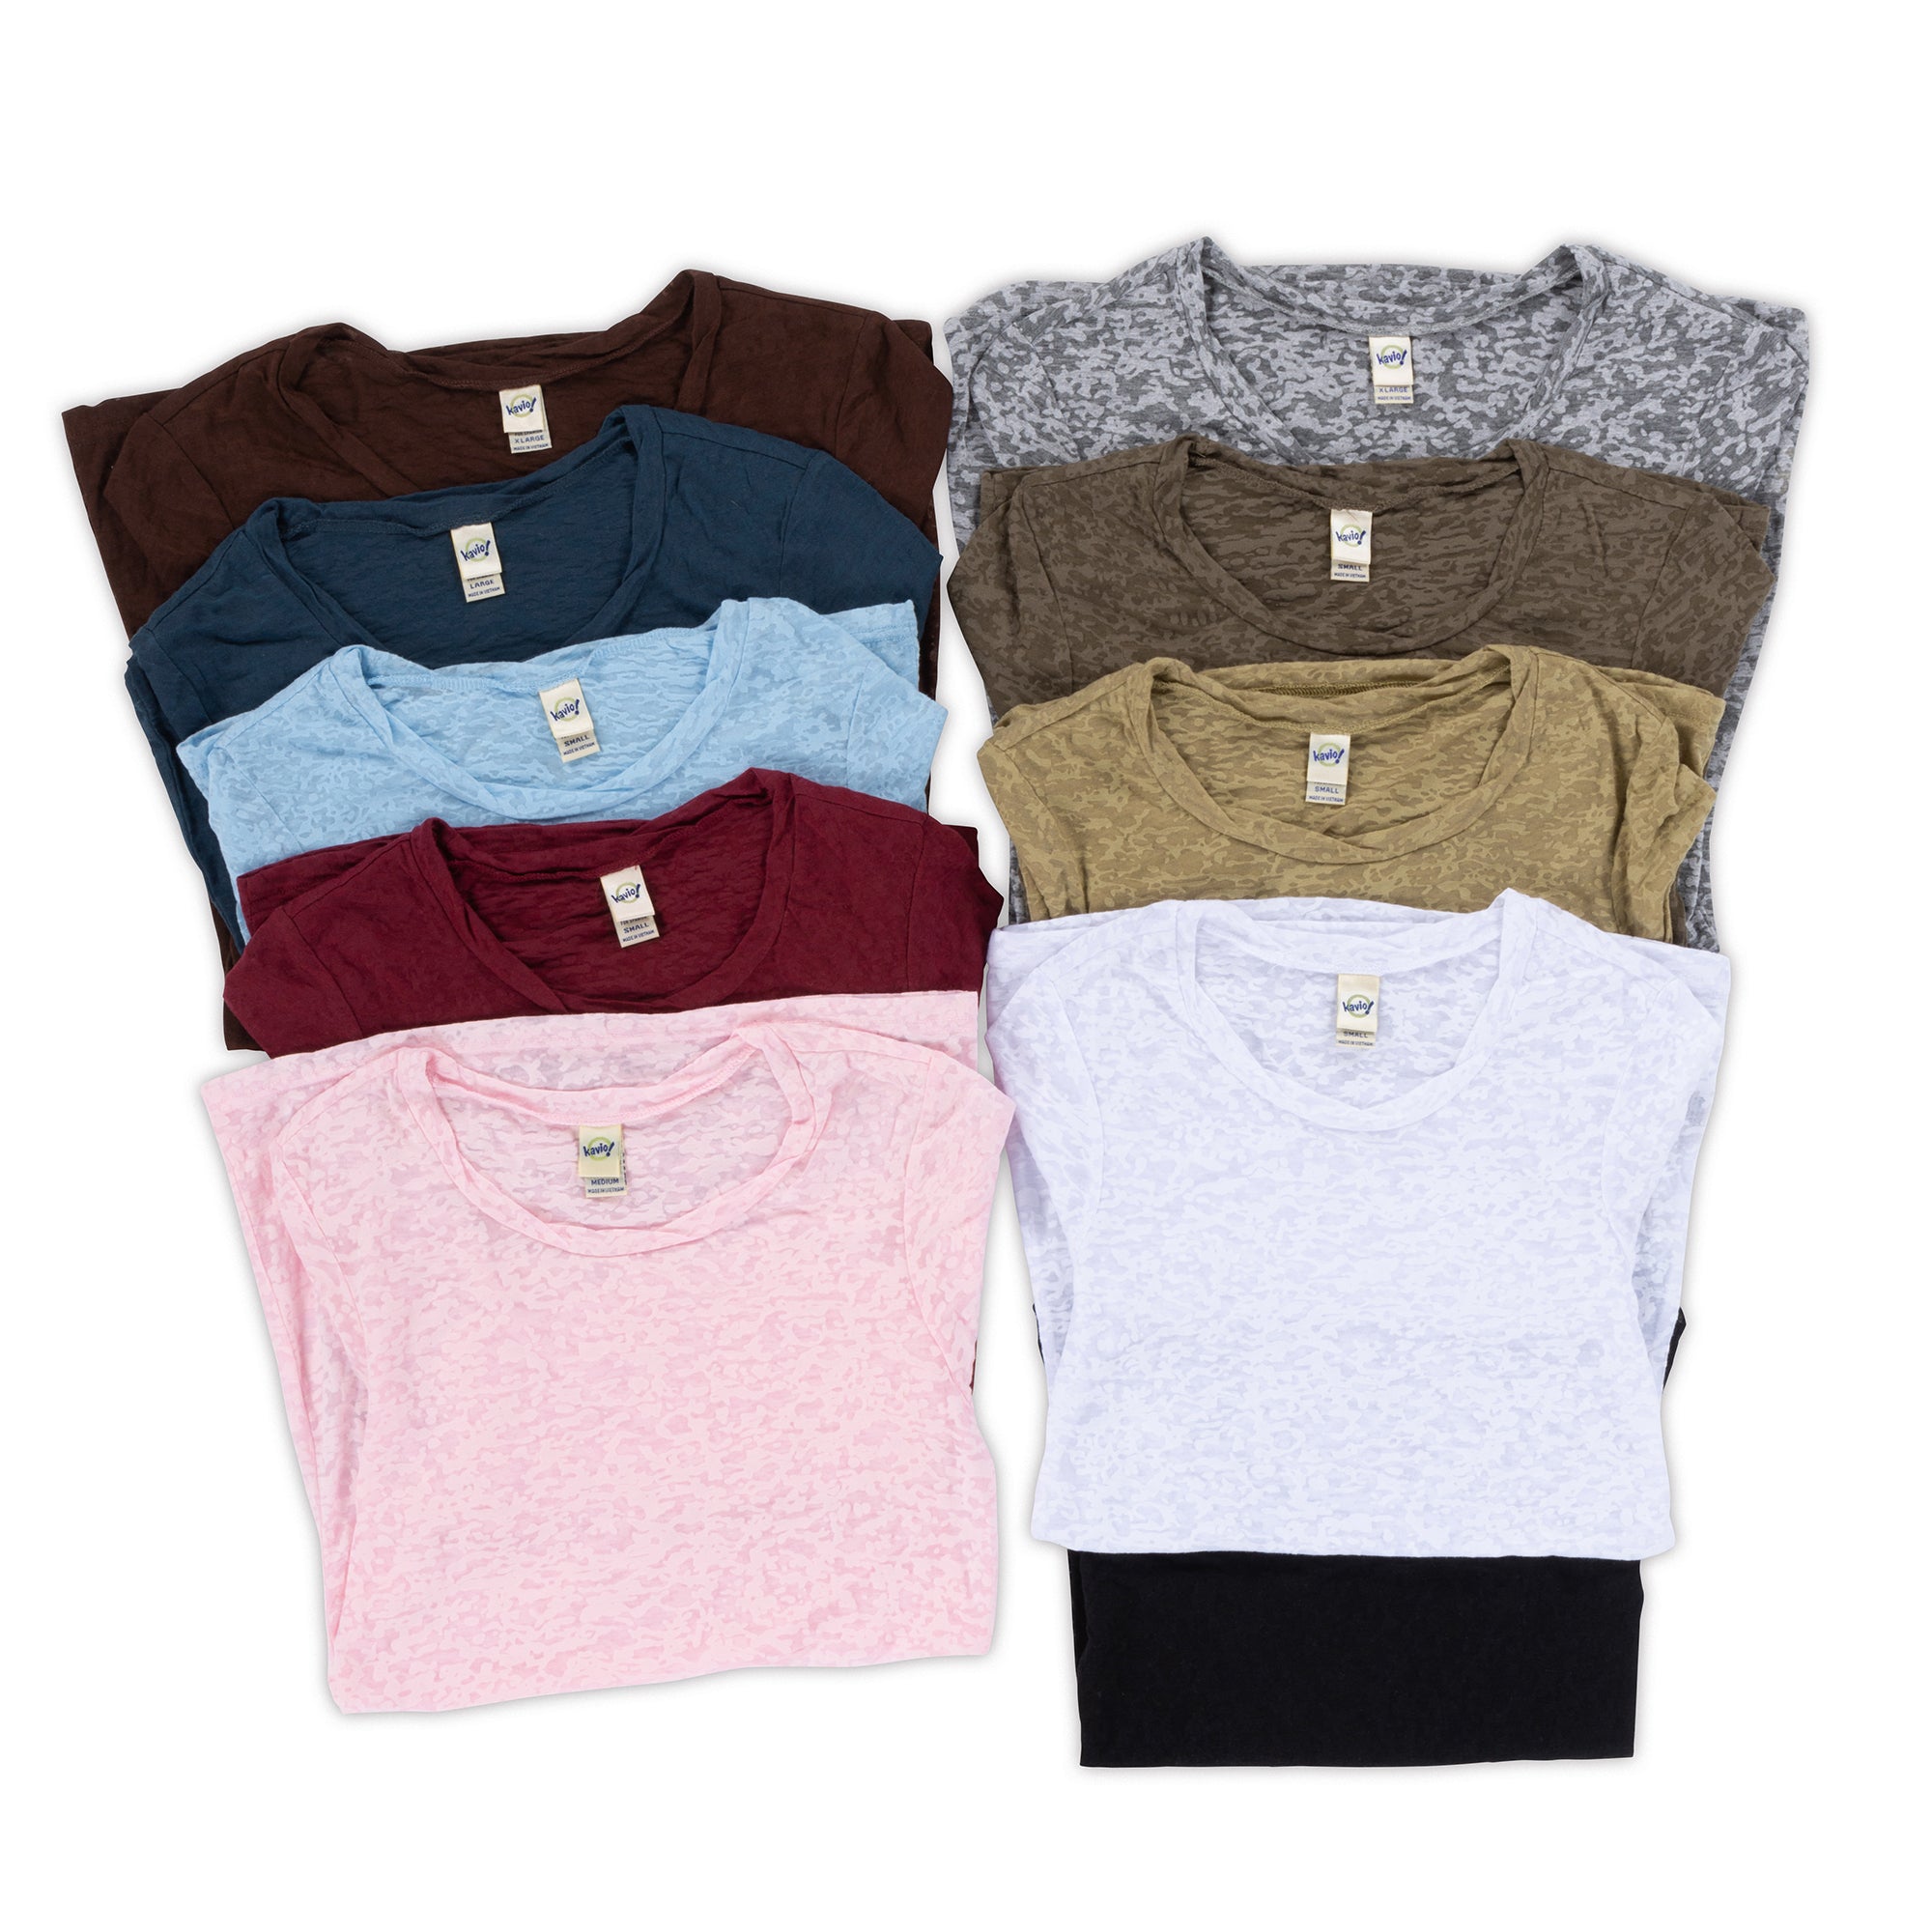 Women's L/S T-Shirt - 7 to 9 Assorted Colors/4 Sizes - 8pcs/pack ($4.90/pc)****